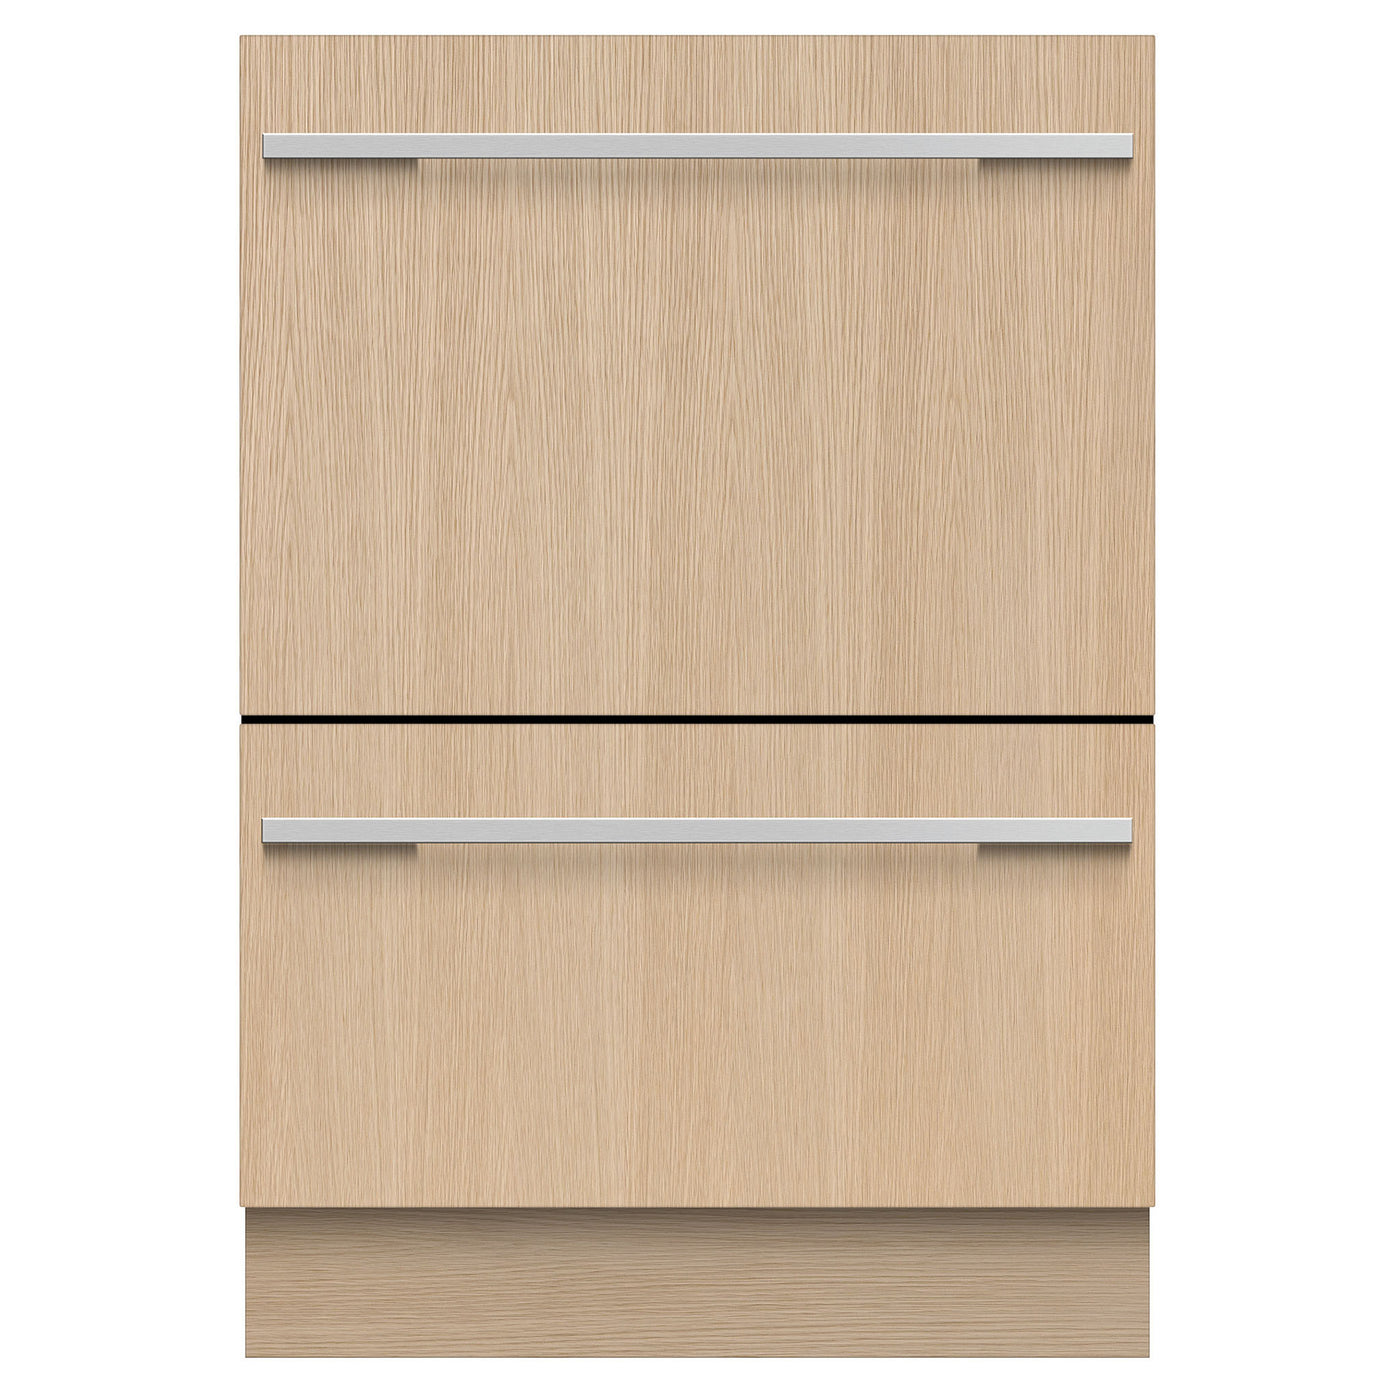 Integrated Double DishDrawer™ Dishwasher, Tall, Sanitize 